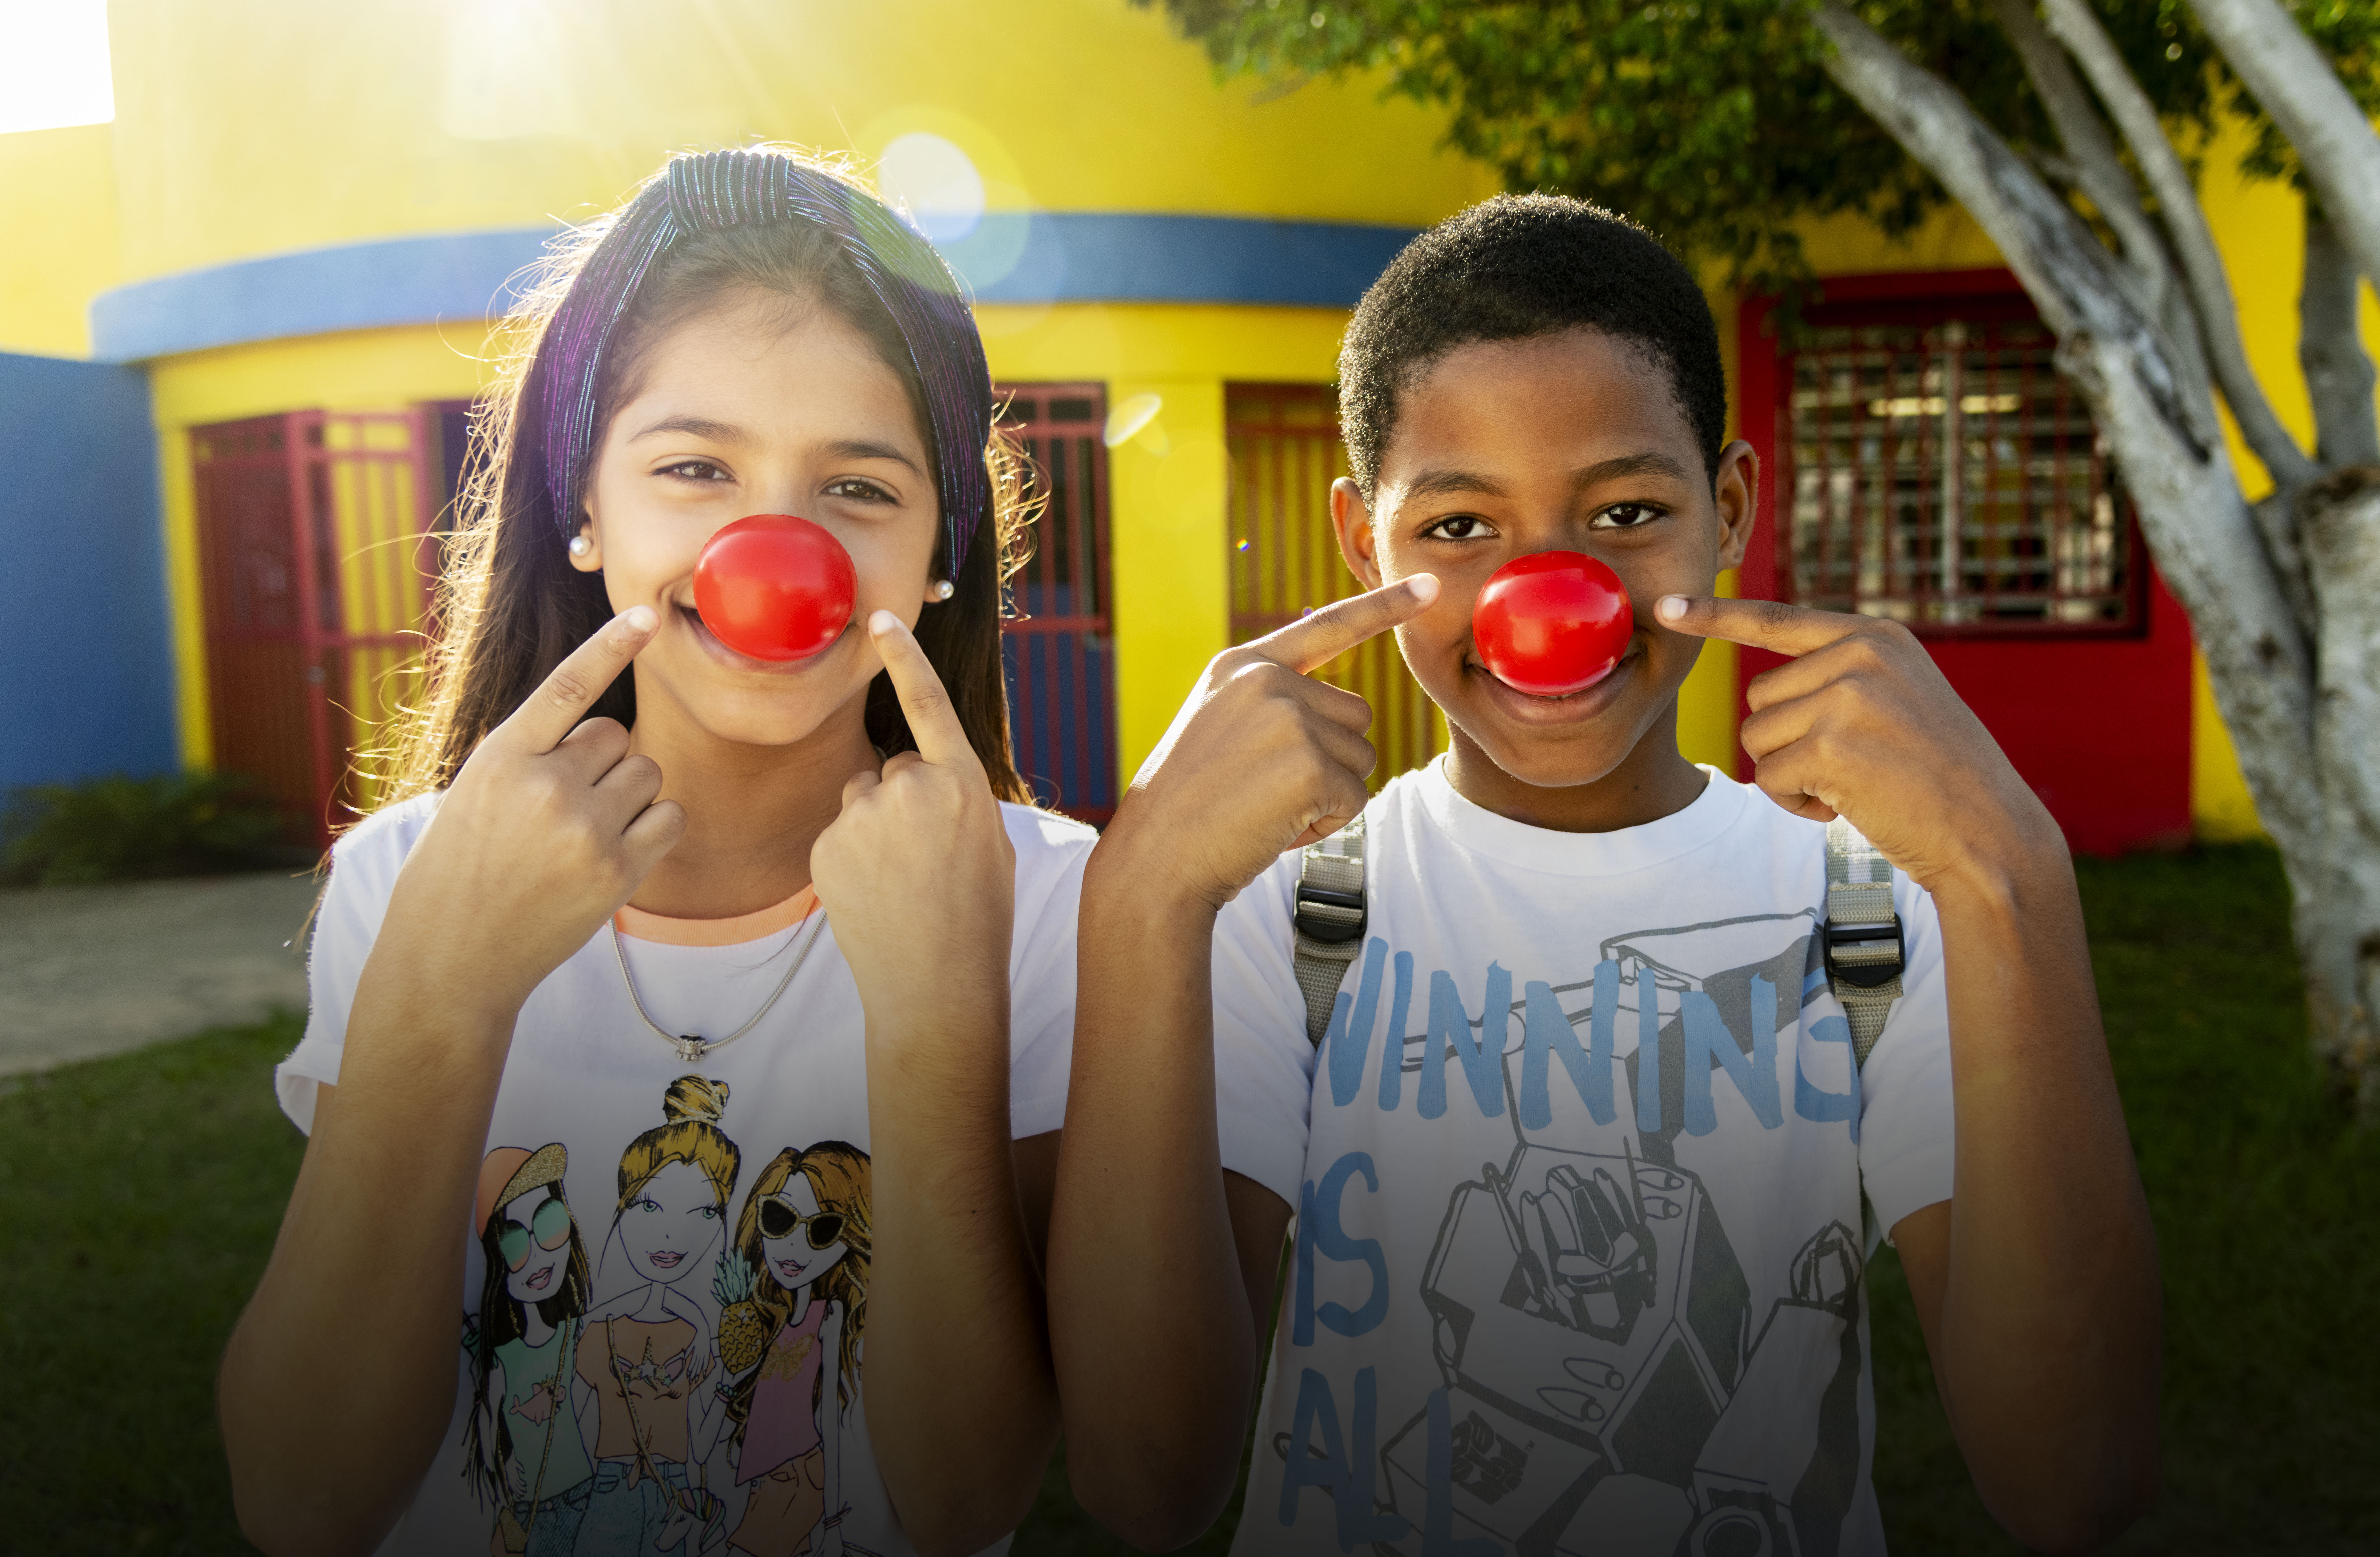 Red Nose Day has positively impacted nearly 25 million children across the U.S. and around the world.